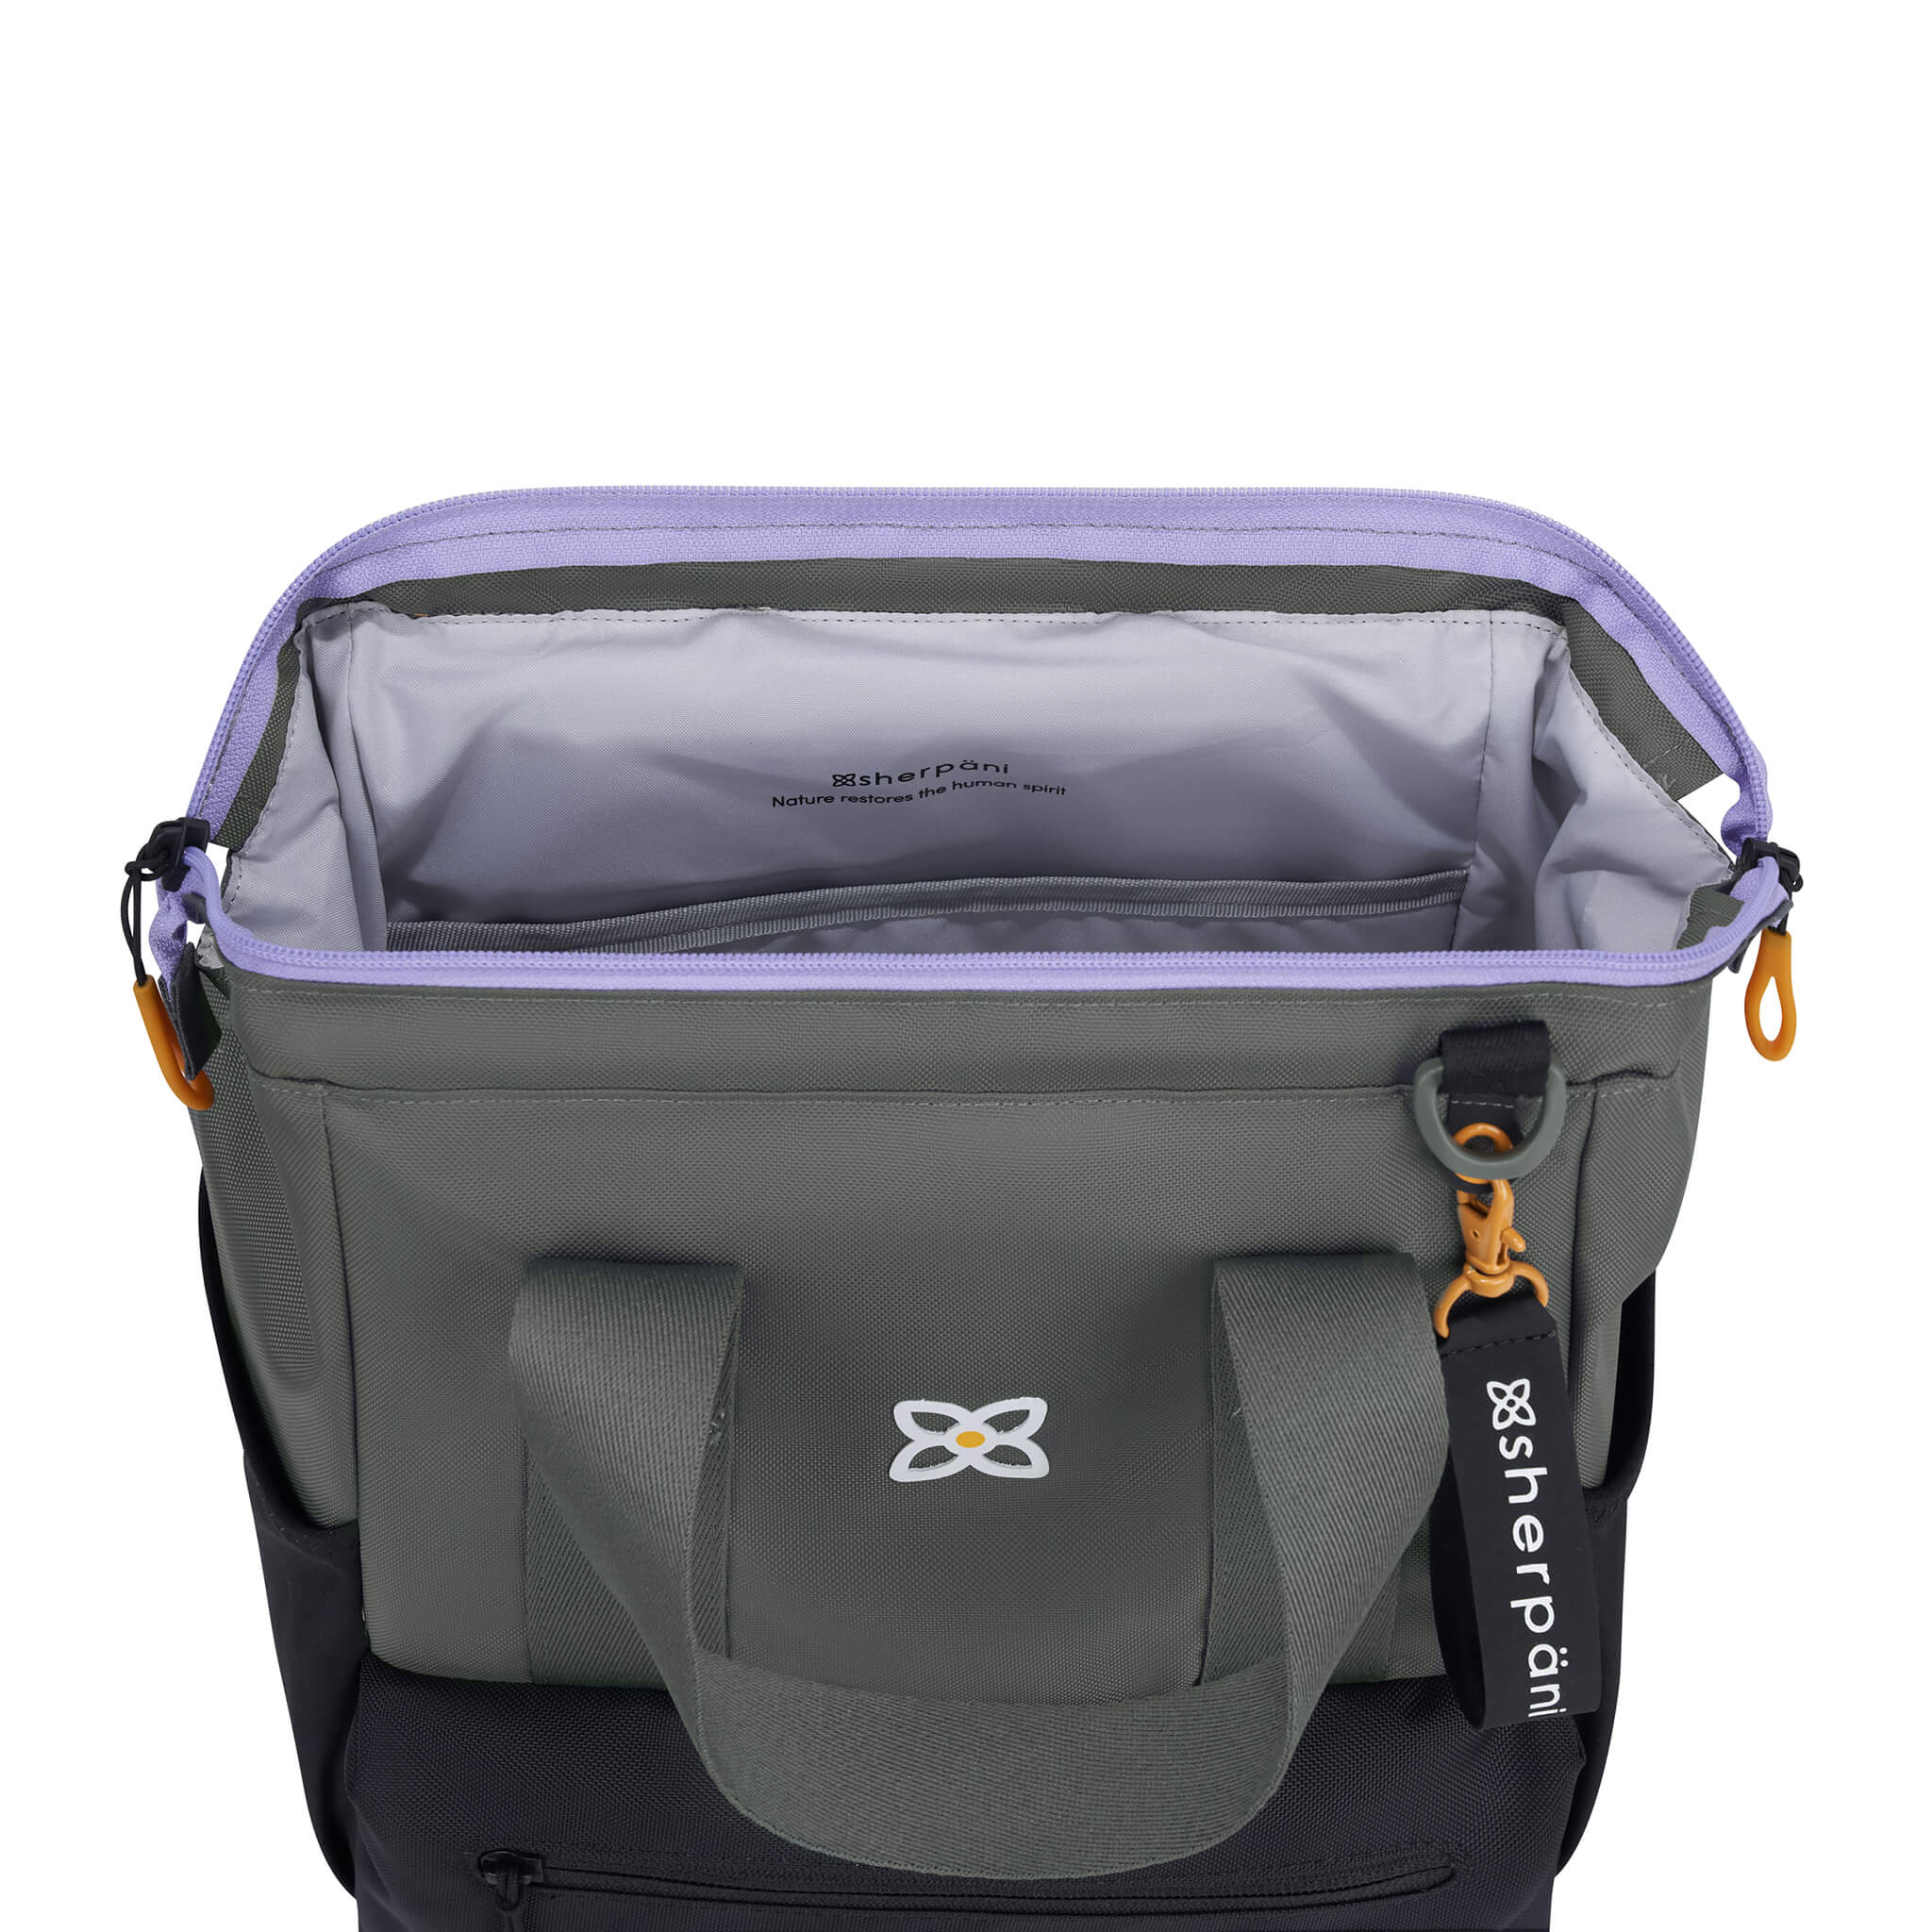 Inside view of Sherpani travel bag, the Dispatch. The main bag compartment features a rectangular frame and doctor bag style opening so you can see right to the bottom. 